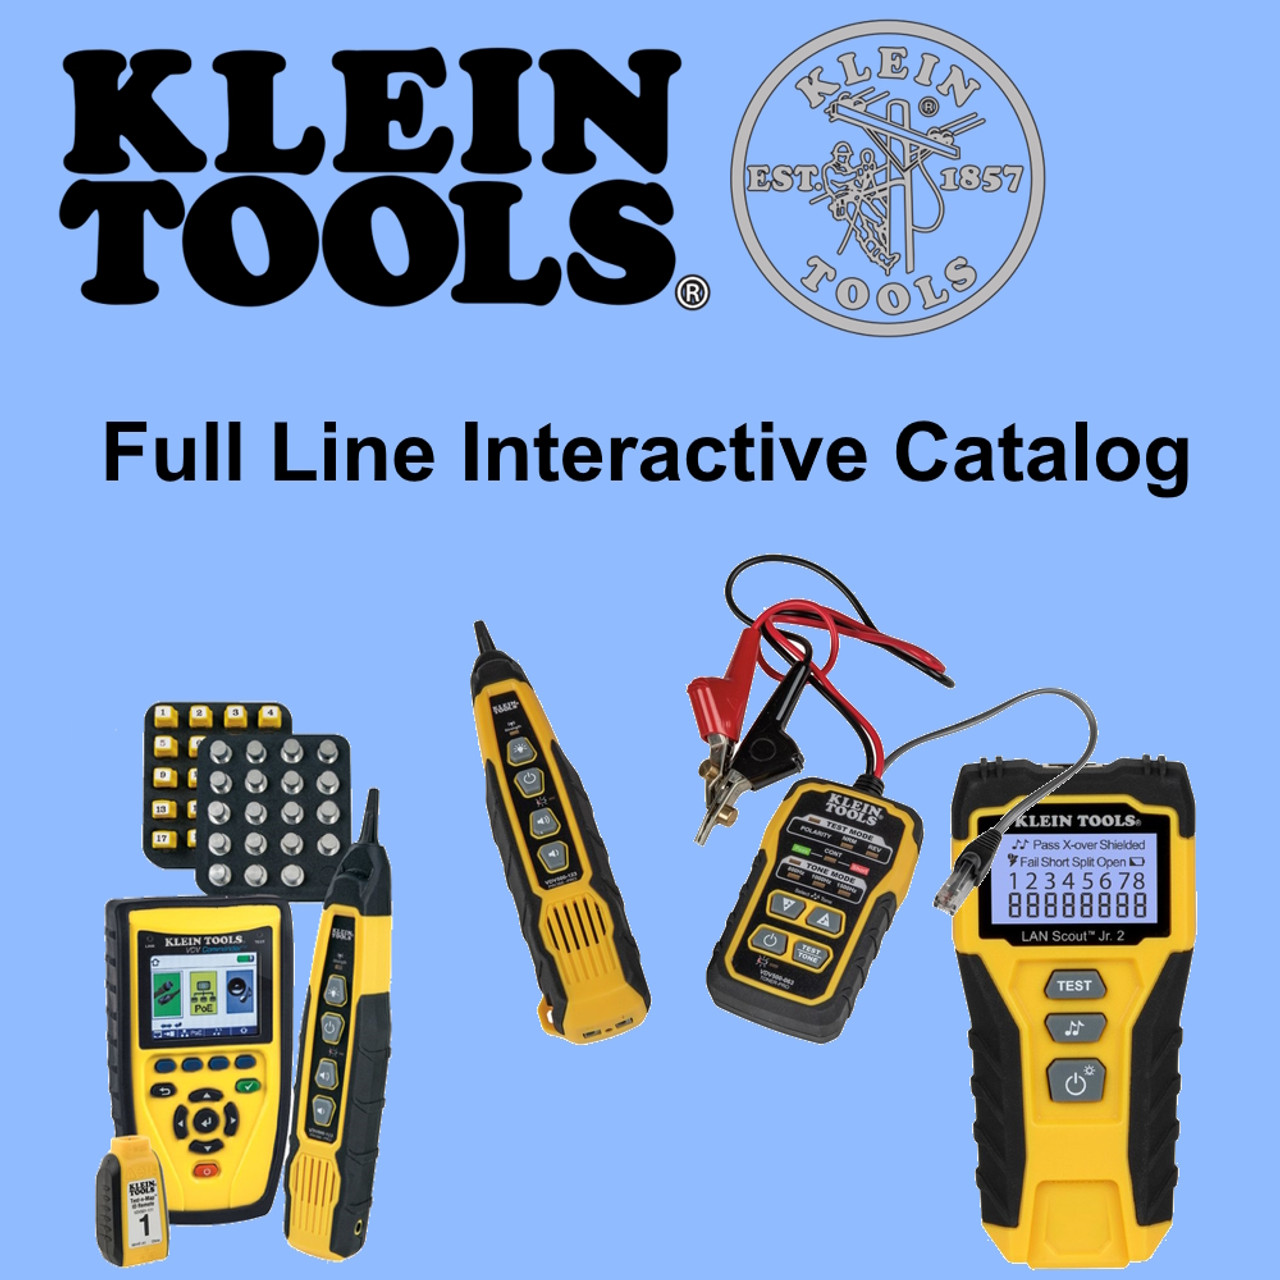 Klein Tools D2000-7CST Diagonal Cutters, Slim Head Linesman Pliers is  Spring Loaded, Heavy-Duty Ironworker Pliers Cut ACSR, Screws, and More -  Klein Tools Wire Tie Pliers 